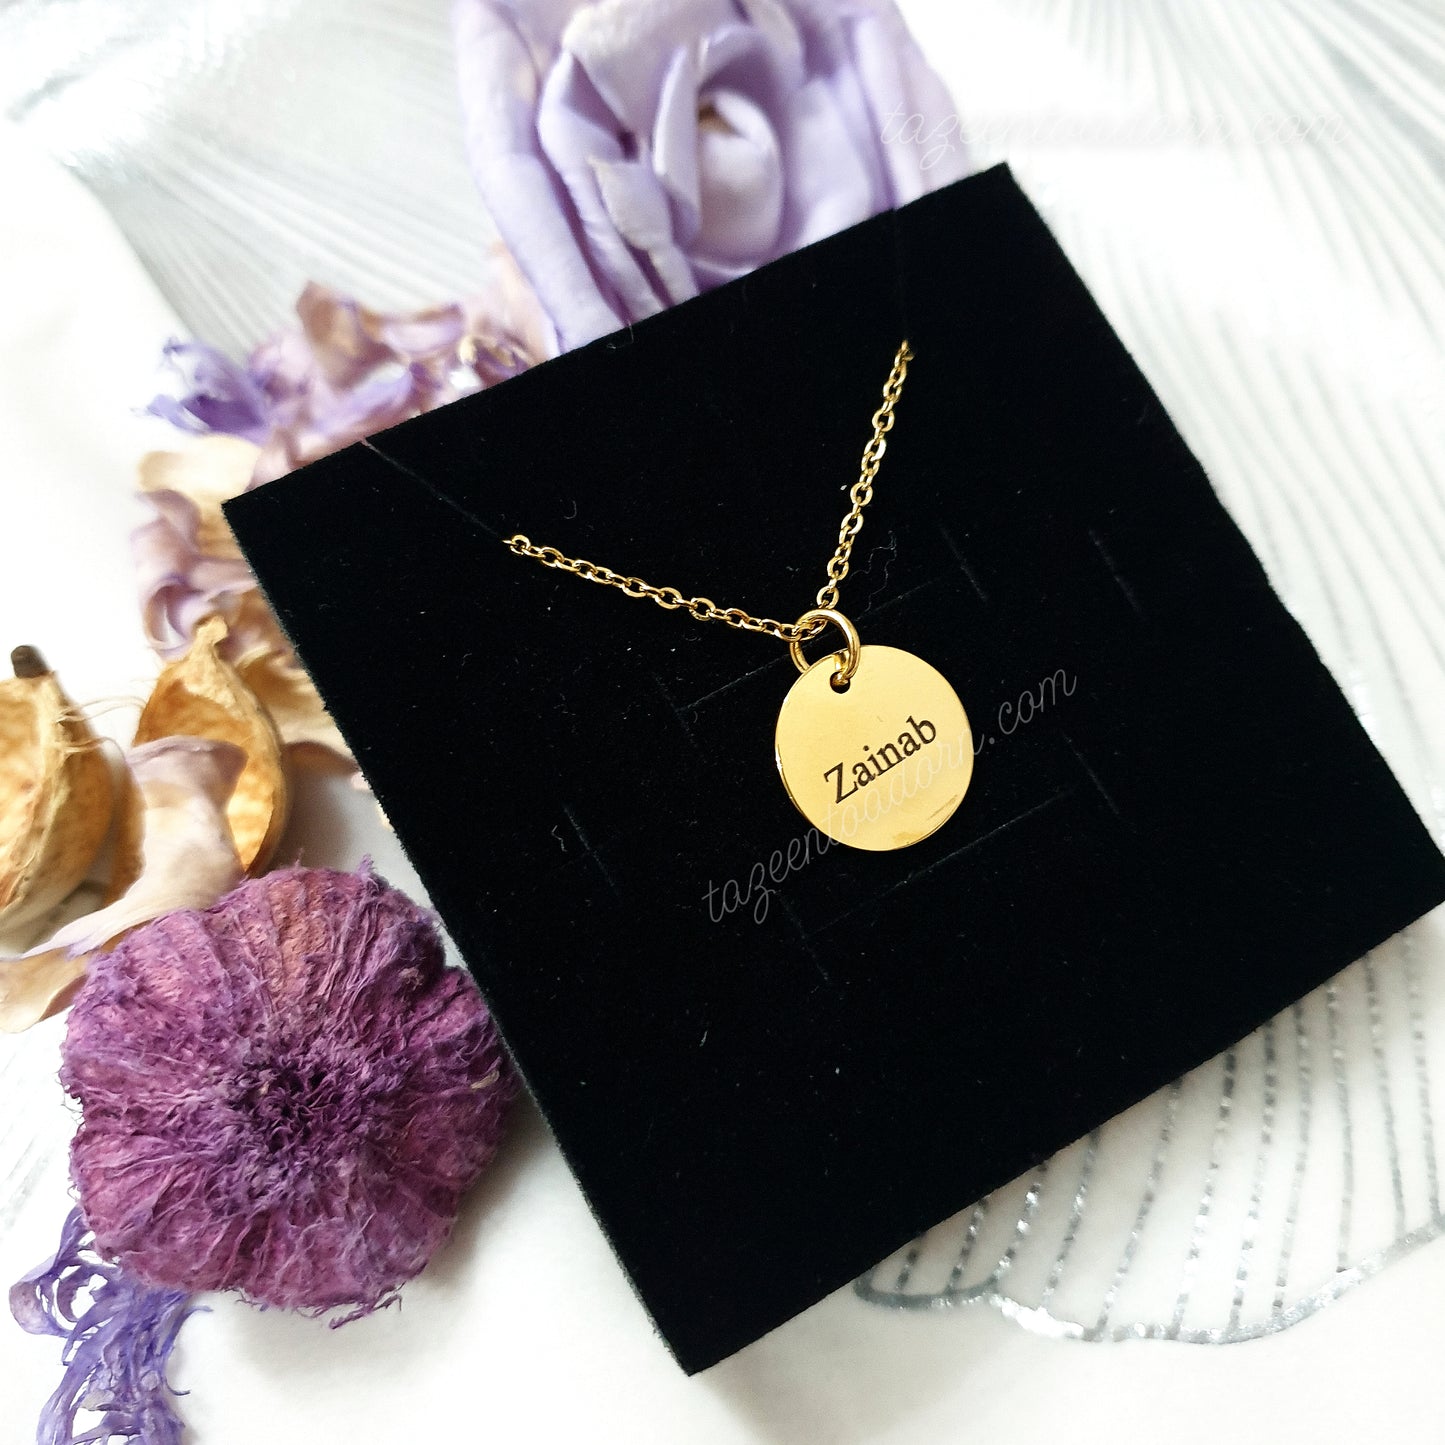 Name 'Zainab' - Arabic Coin Name Necklace - 18K Gold Plated